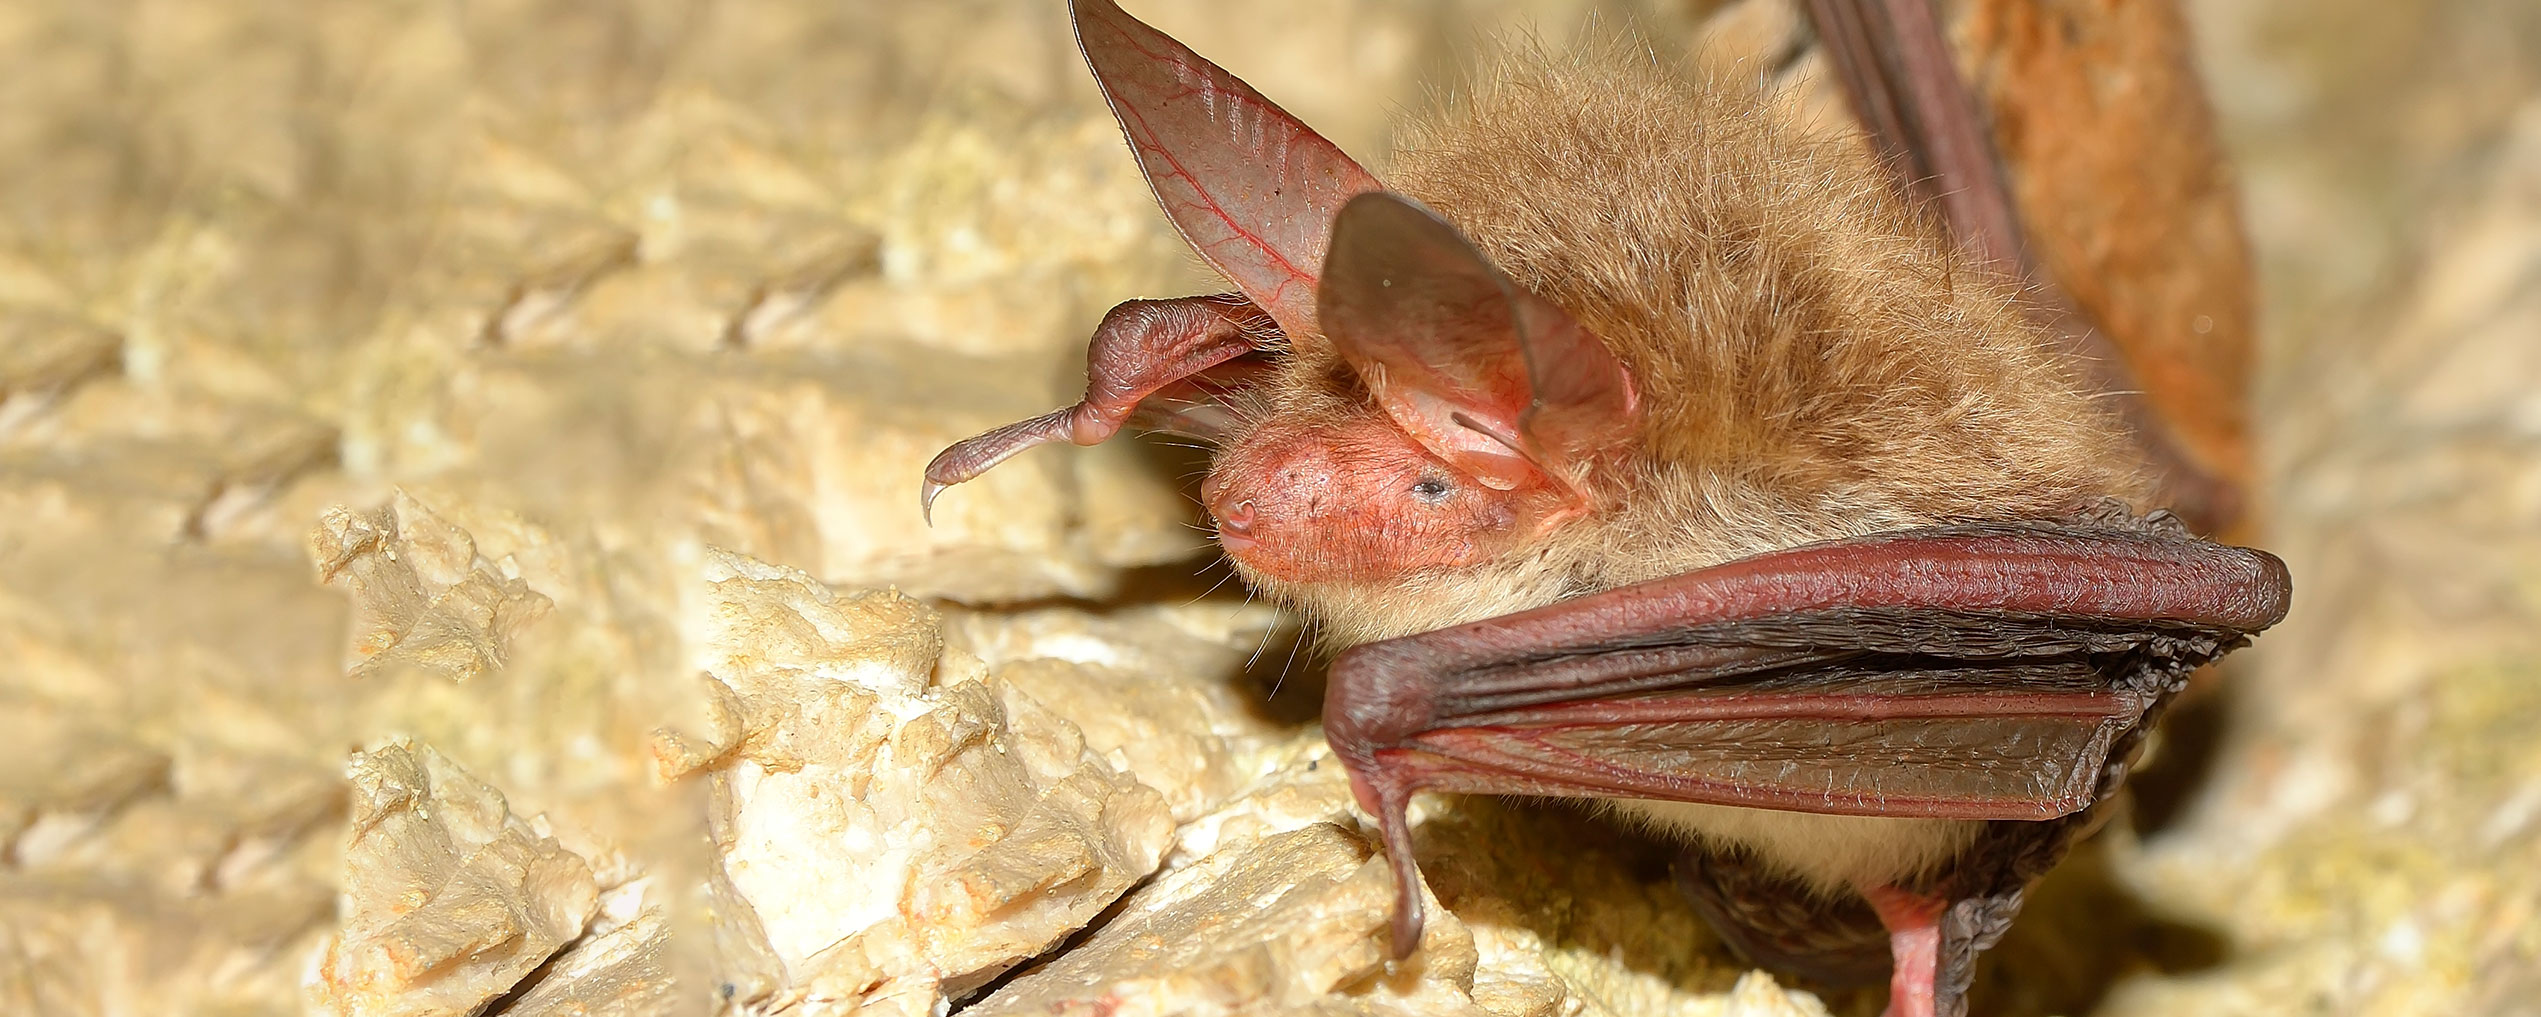 Learn what to do in case of a bat bite